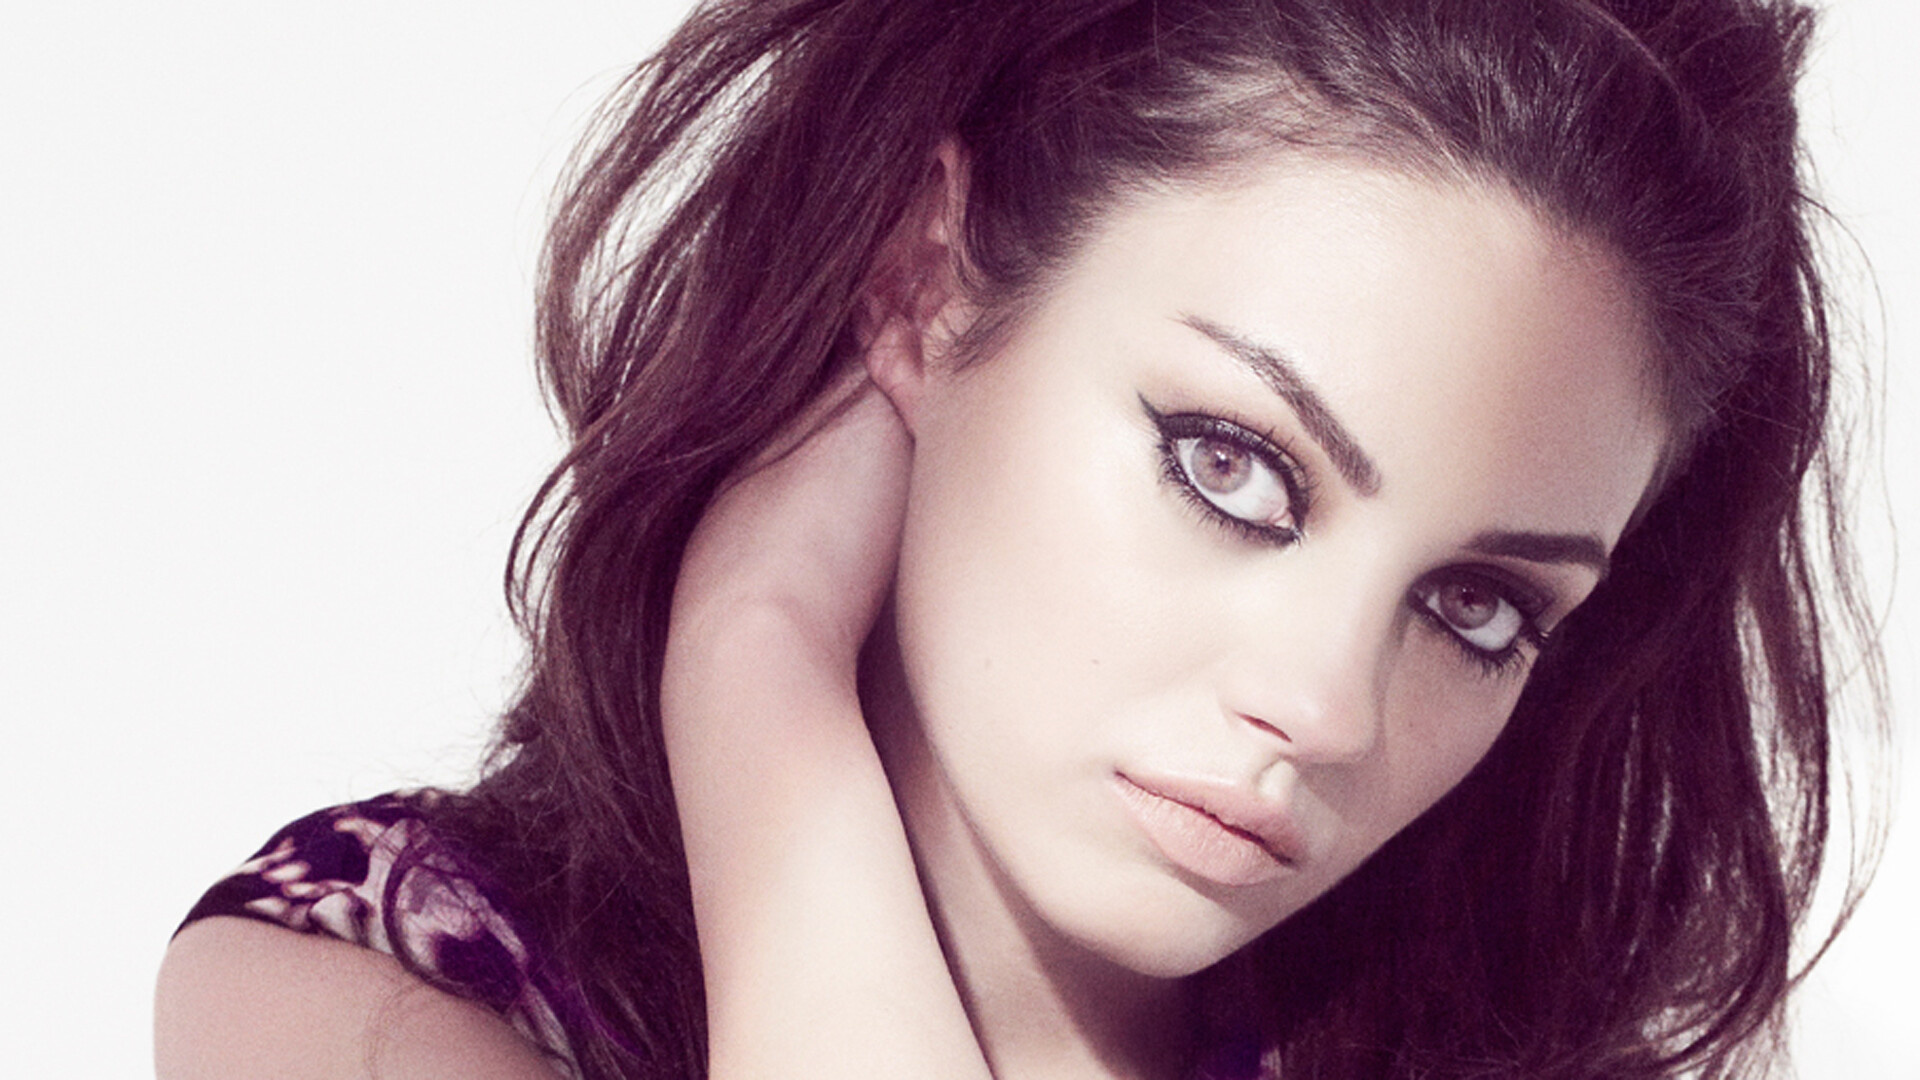 Mila Kunis movies, Wallpapers HD, PC and mobile, Expert actress, 1920x1080 Full HD Desktop